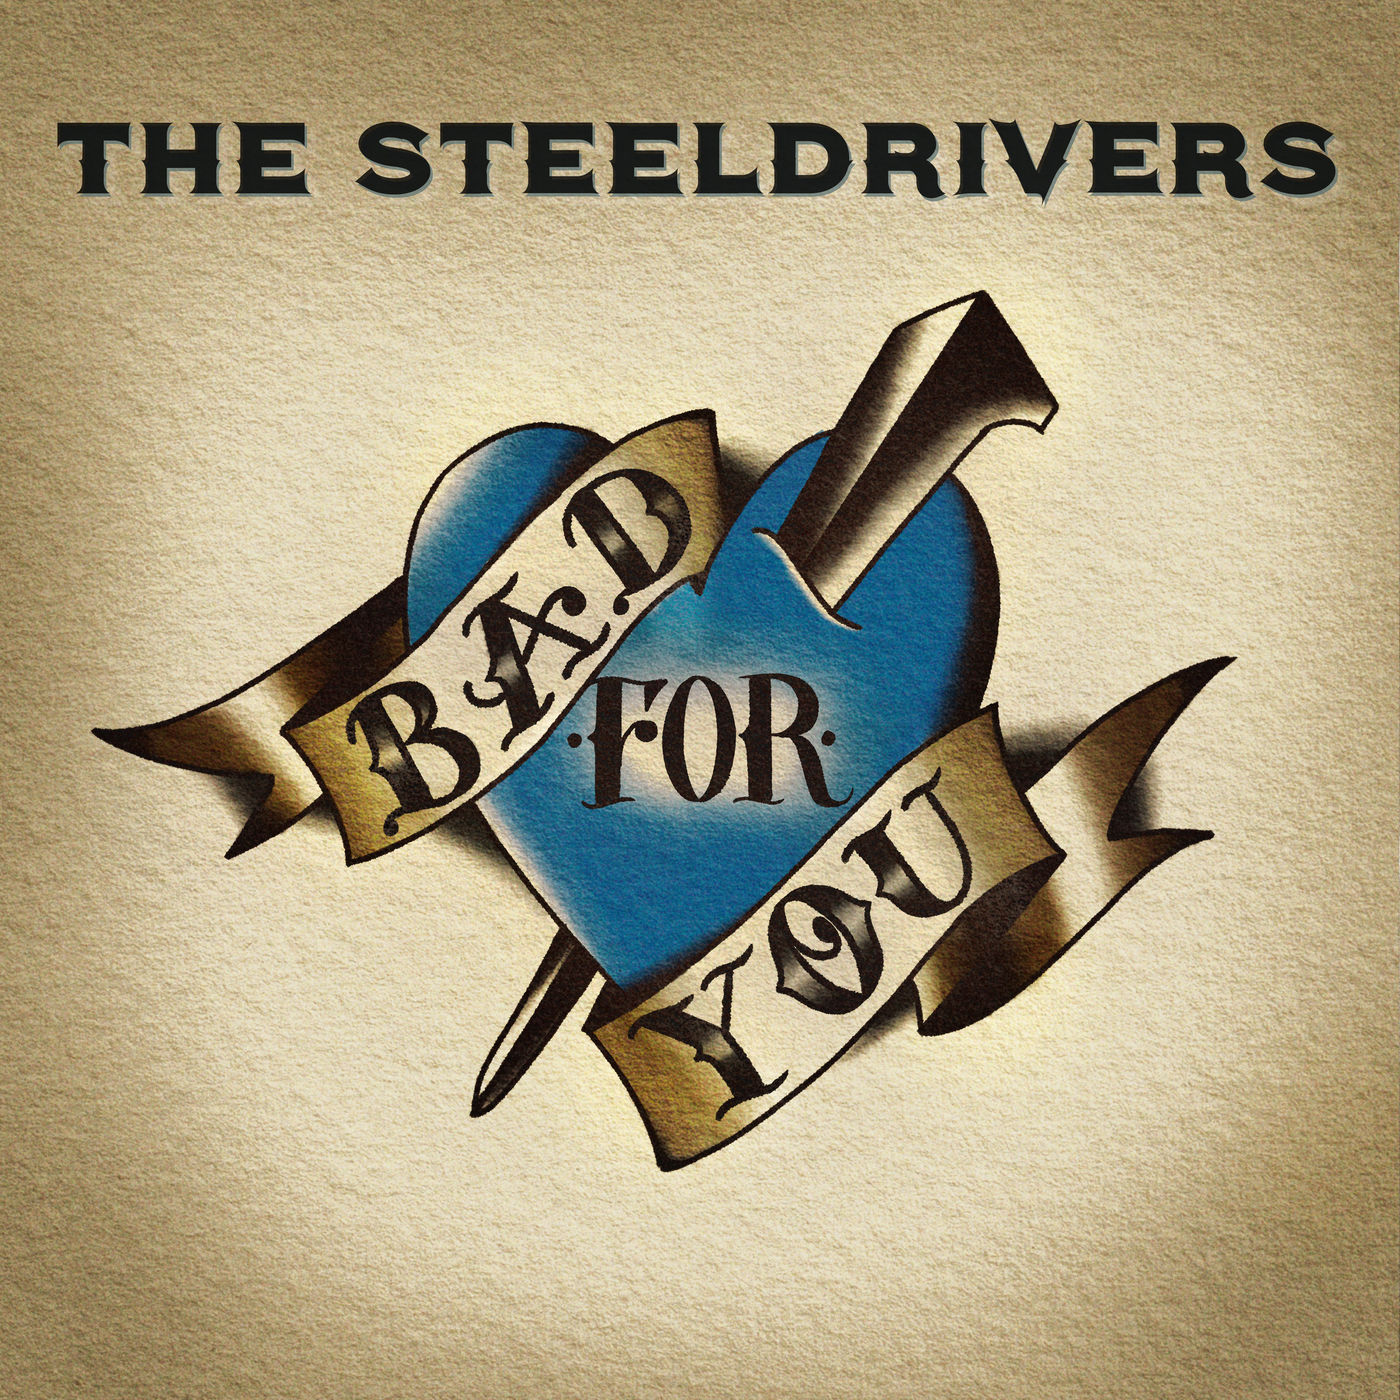 The Steeldrivers – Bad For You (2020) [FLAC 24bit/96kHz]